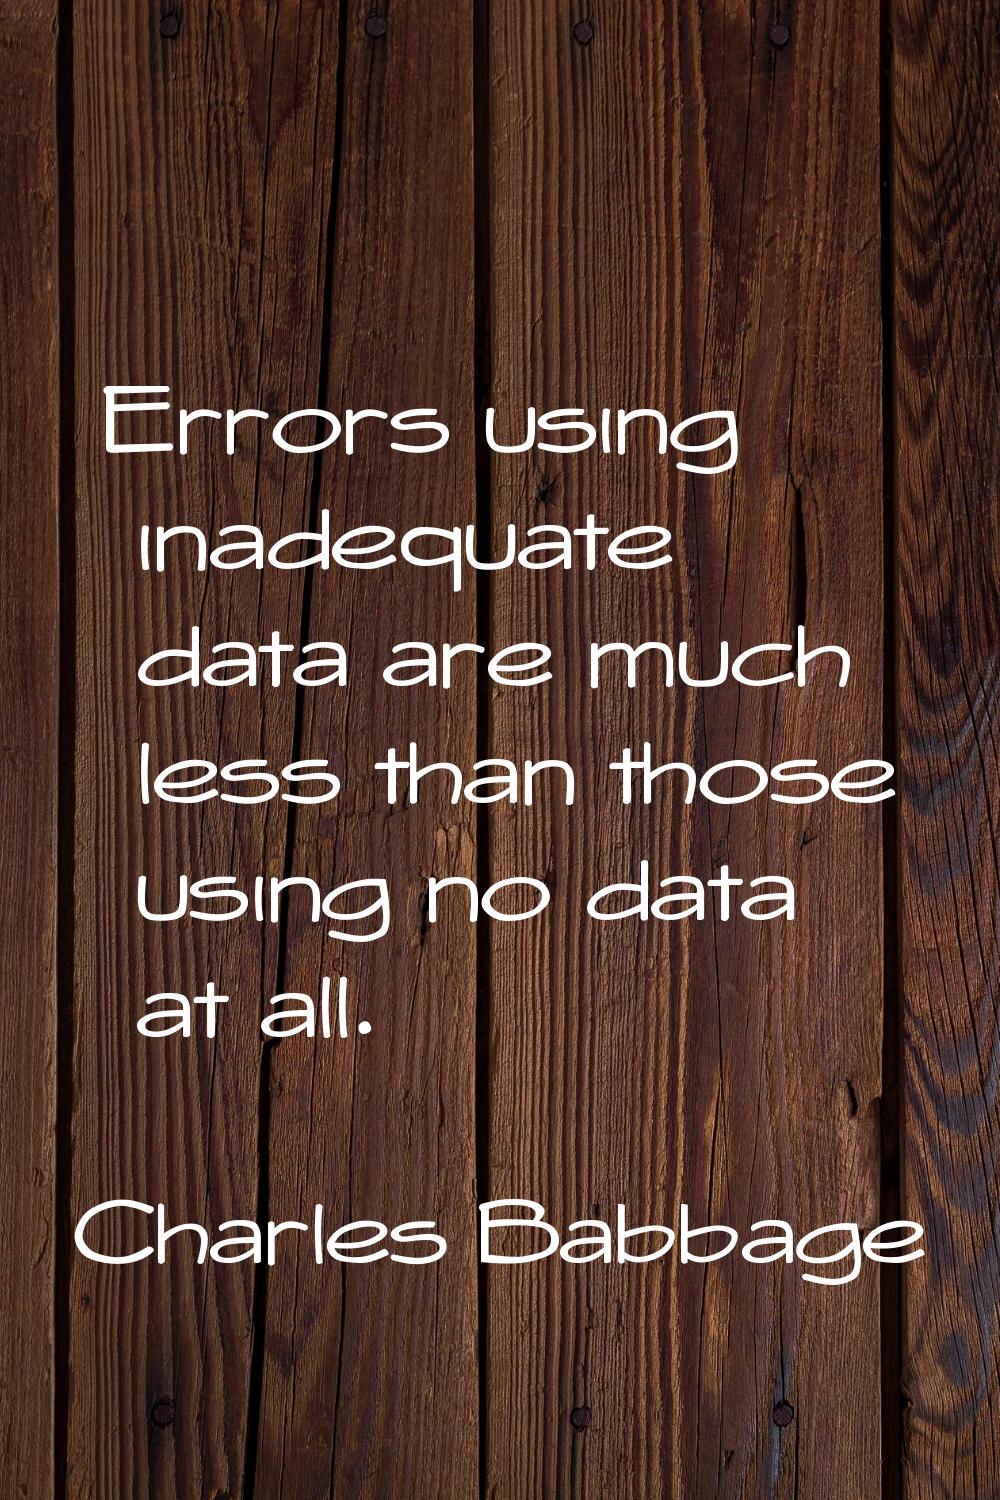 Errors using inadequate data are much less than those using no data at all.